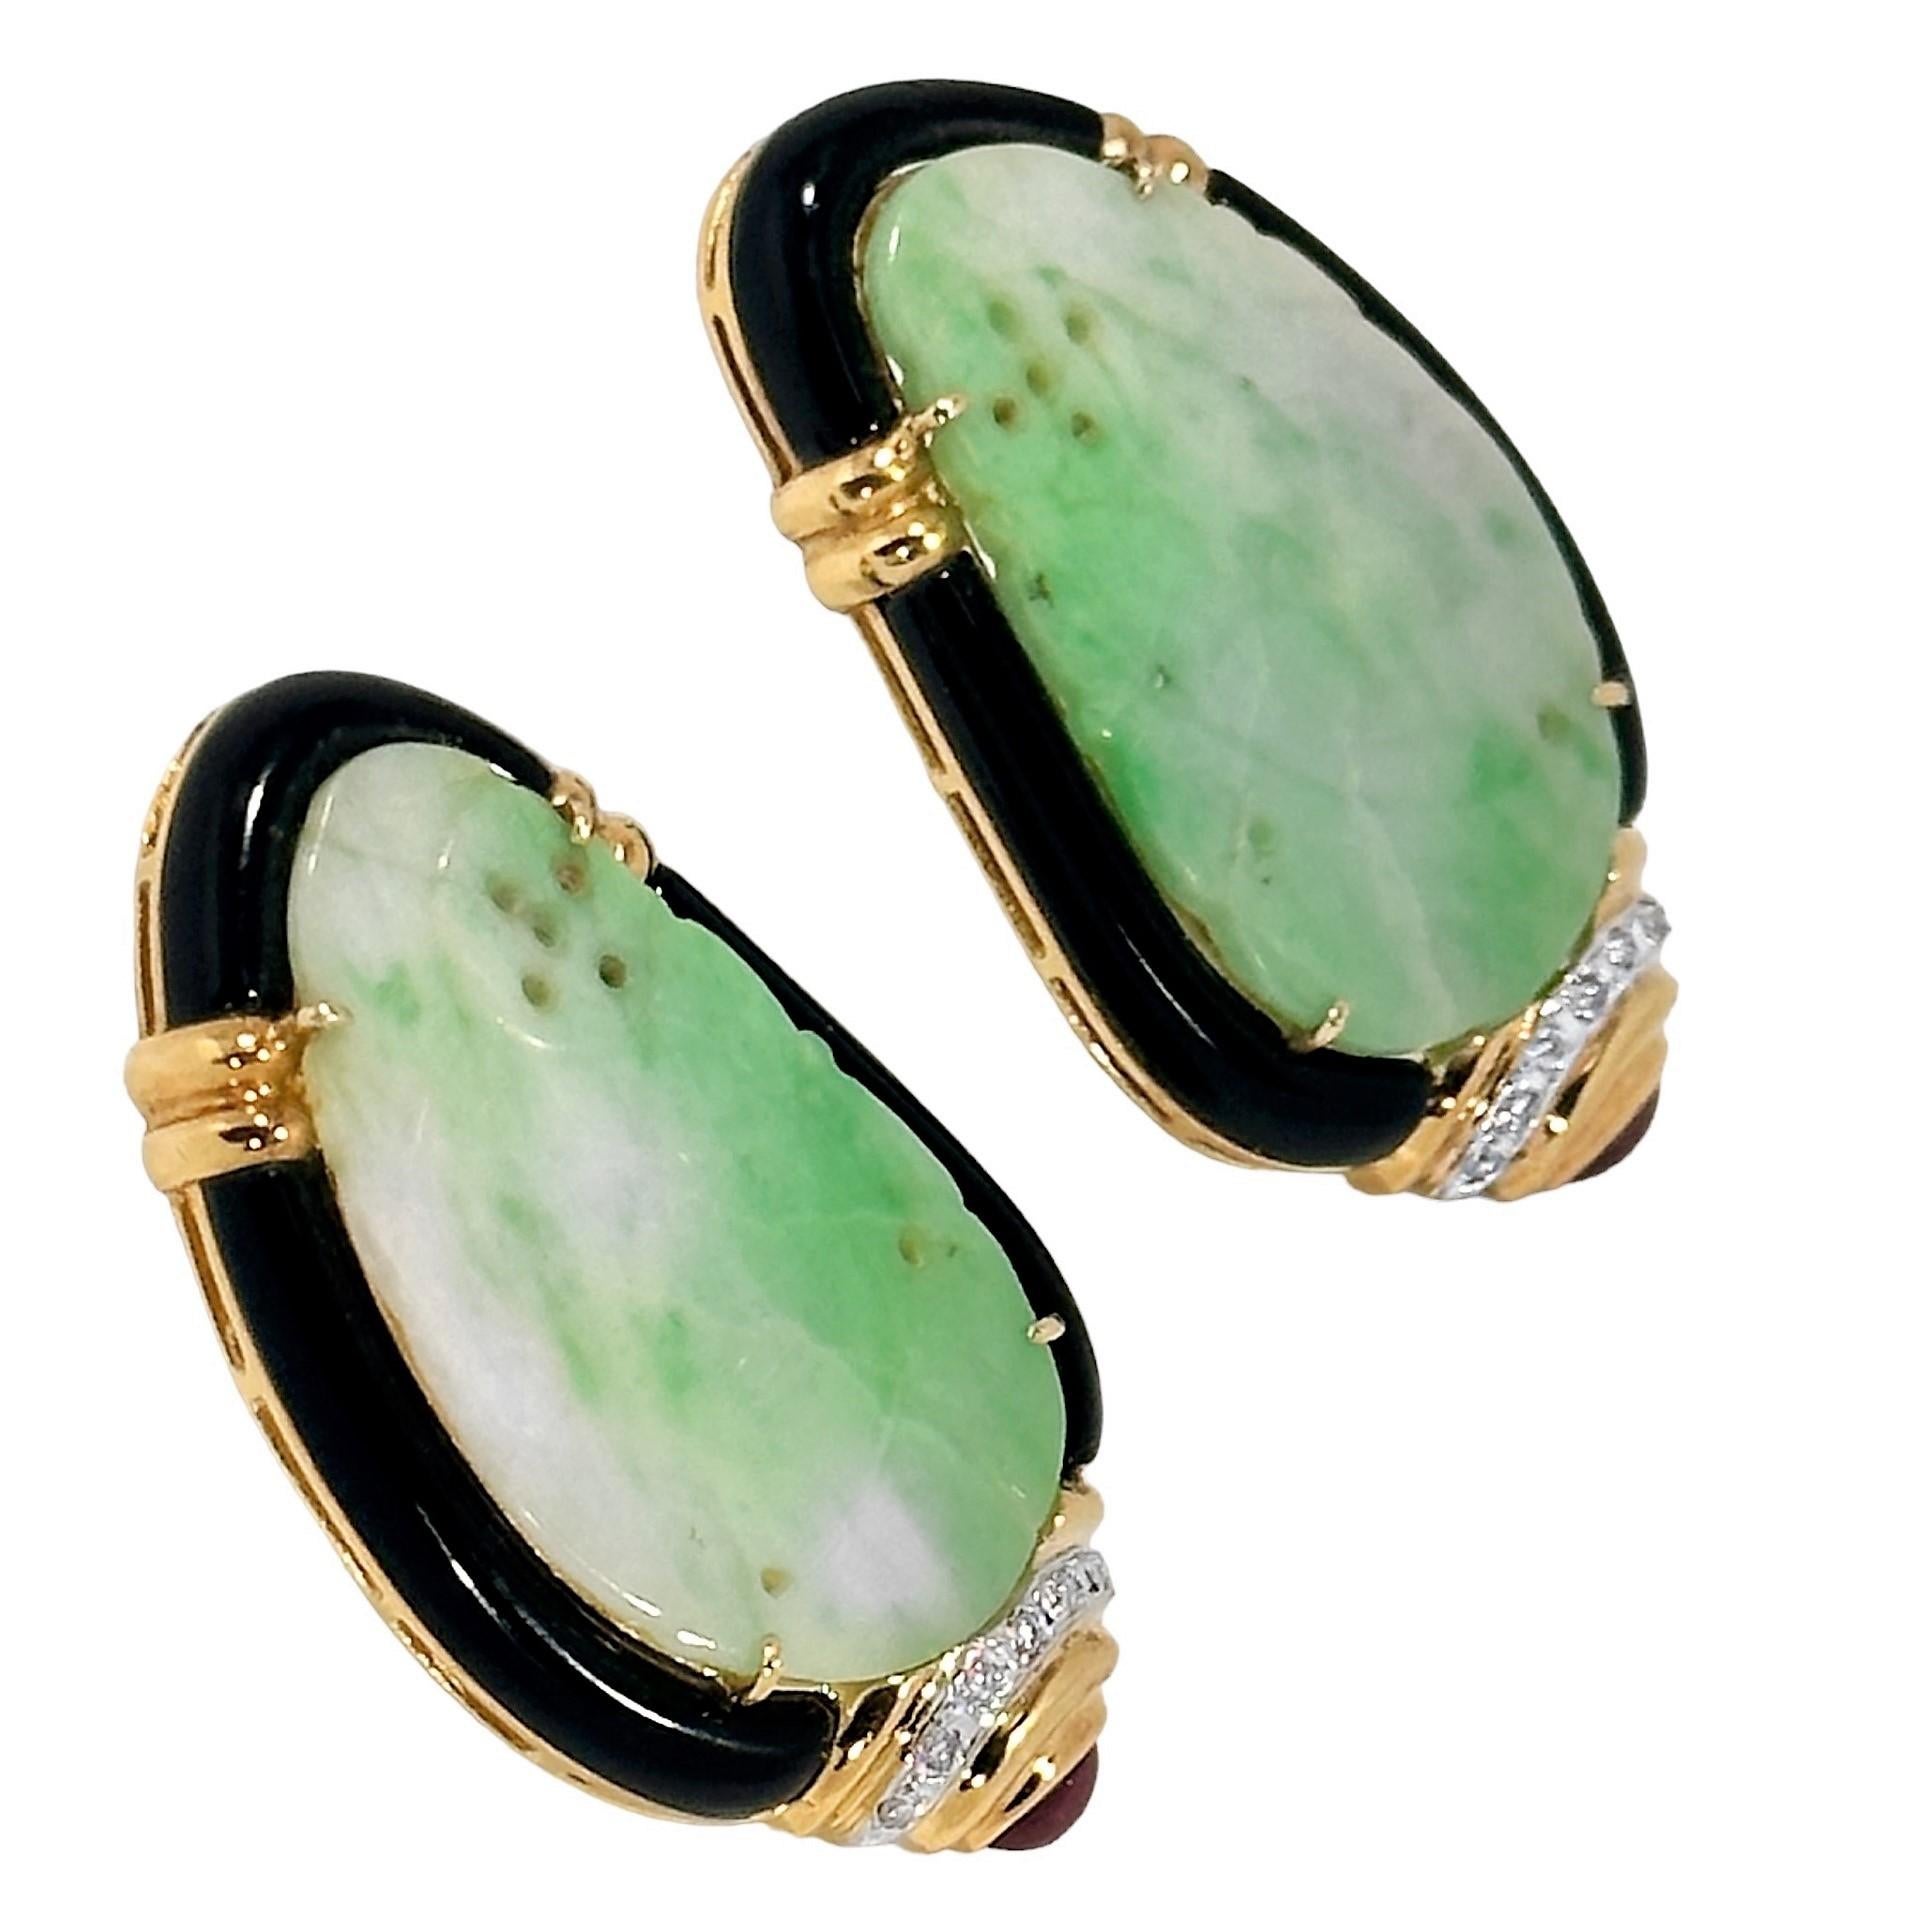 Modern Grand Scale 18k Yellow Gold, Jadeite Jade, Ruby, Diamond and Onyx Earrings For Sale